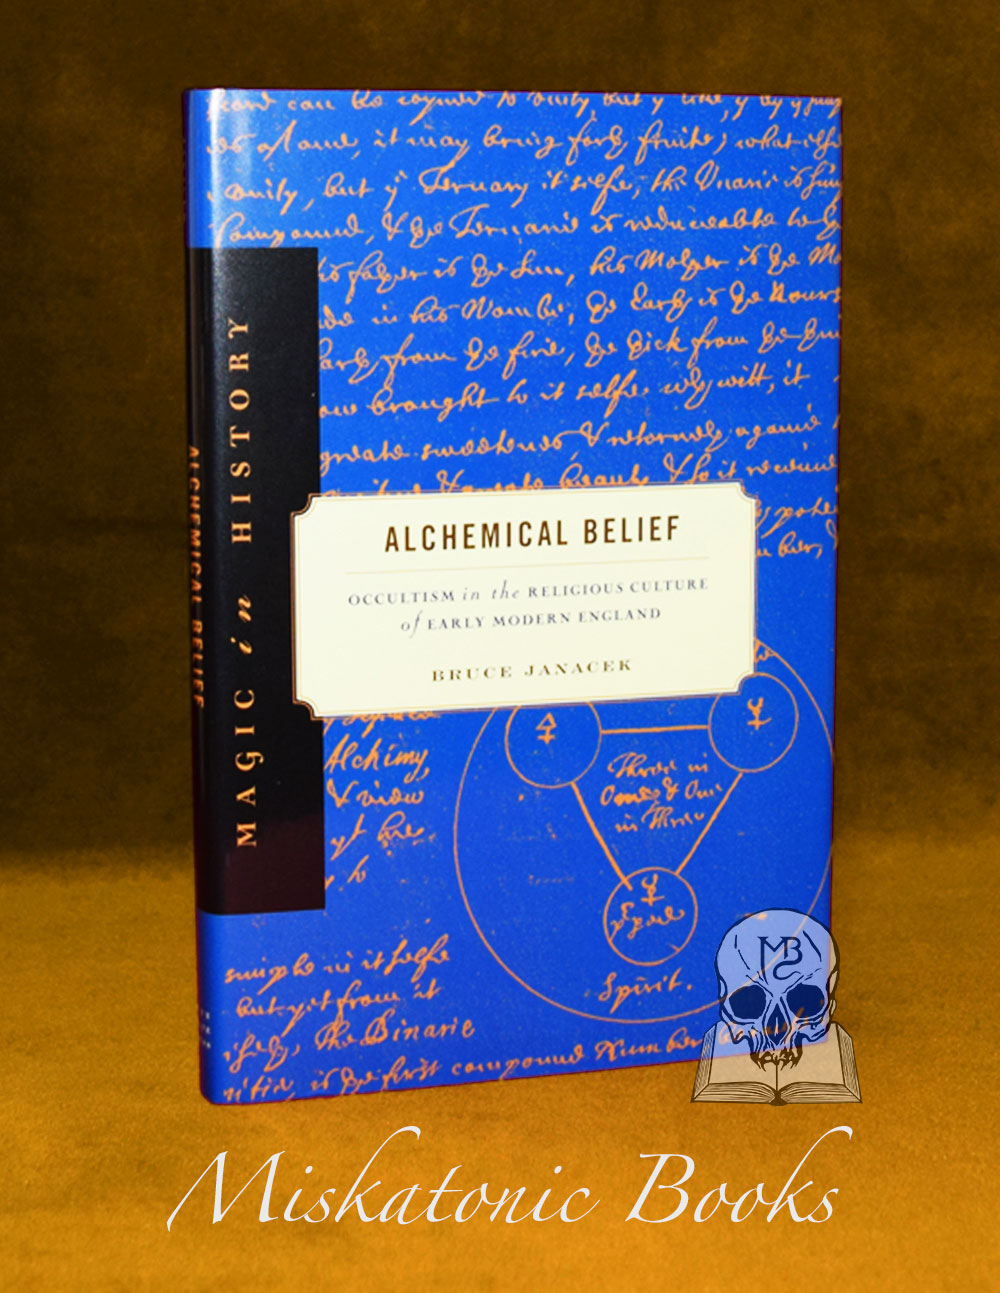 ALCHEMICAL BELIEF: Occultism in Religious Culture of Early Modern England by Bruce Janacek - Hardcover Edition